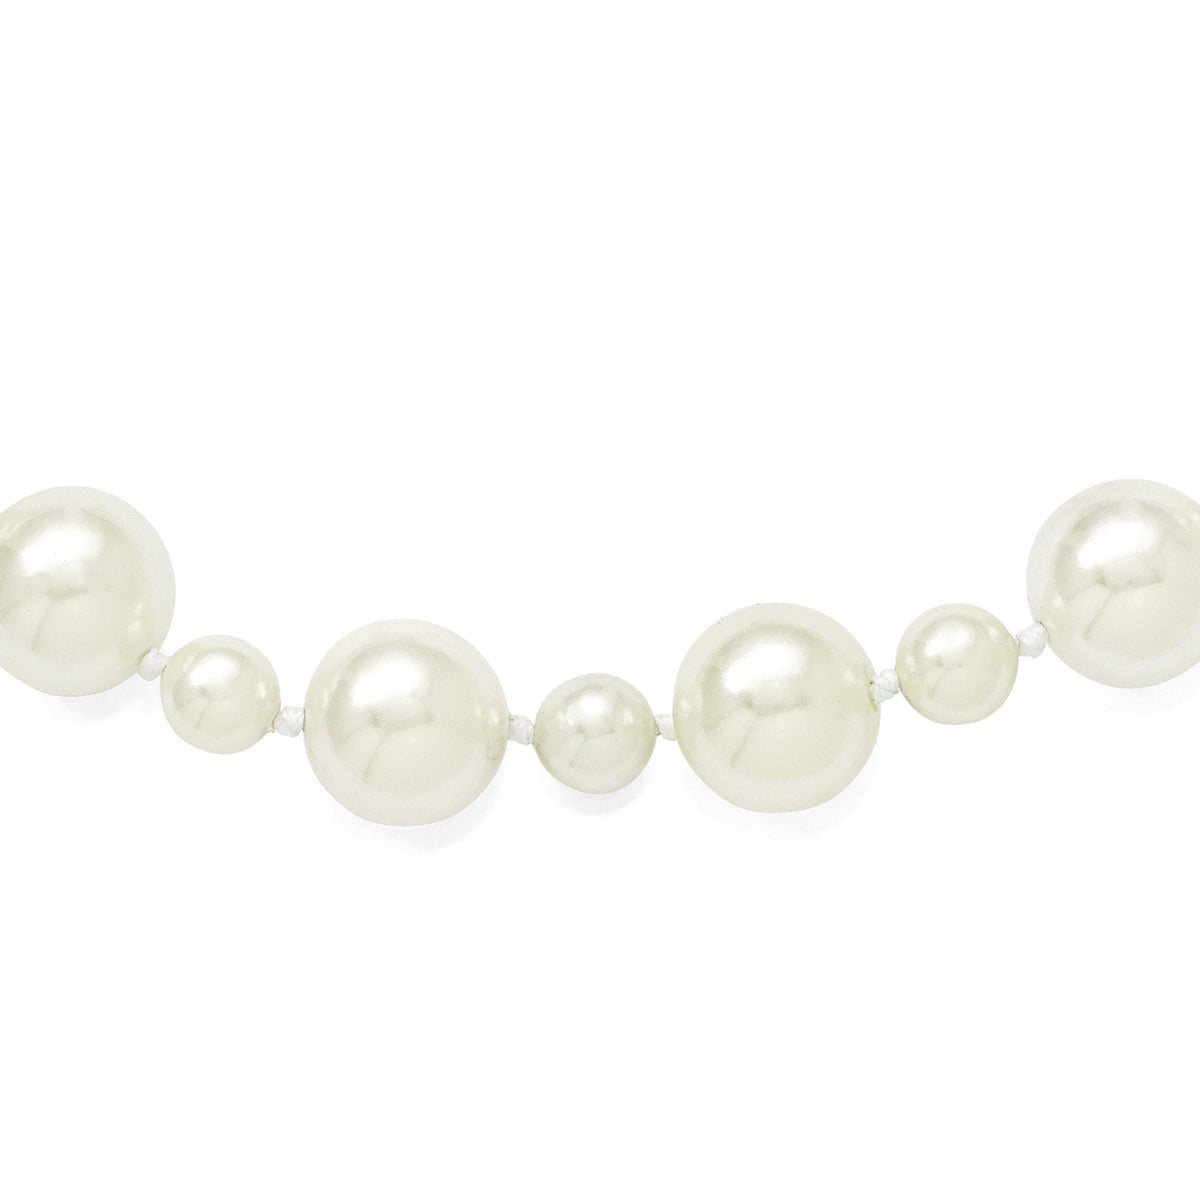 Majestik 7 and 12mm White Imitation Shell Pearl Hand-knotted Slip-on Necklace